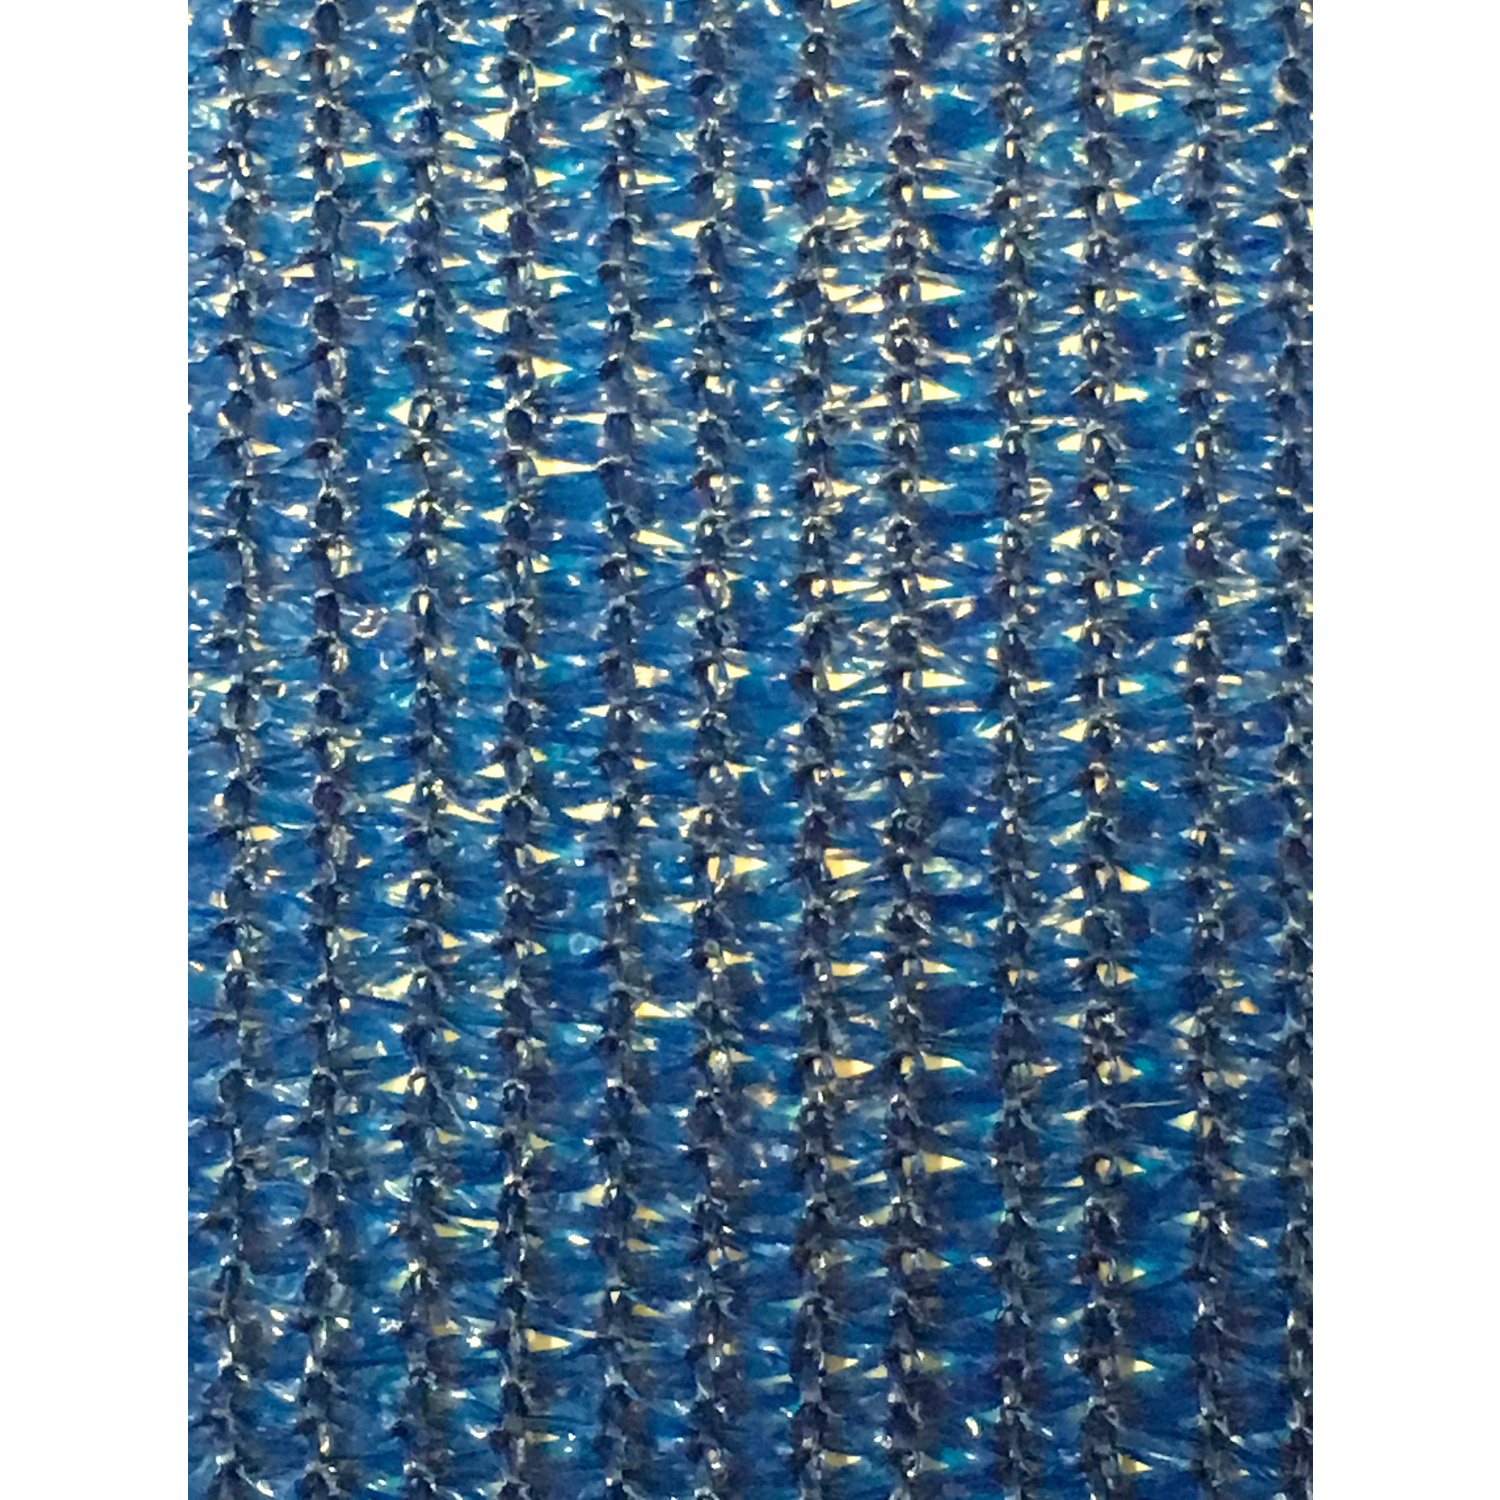 Riverstone Industries PF-620-Blue 5.8 x 20 ft. Knitted Privacy Cloth - Blue - image 4 of 4